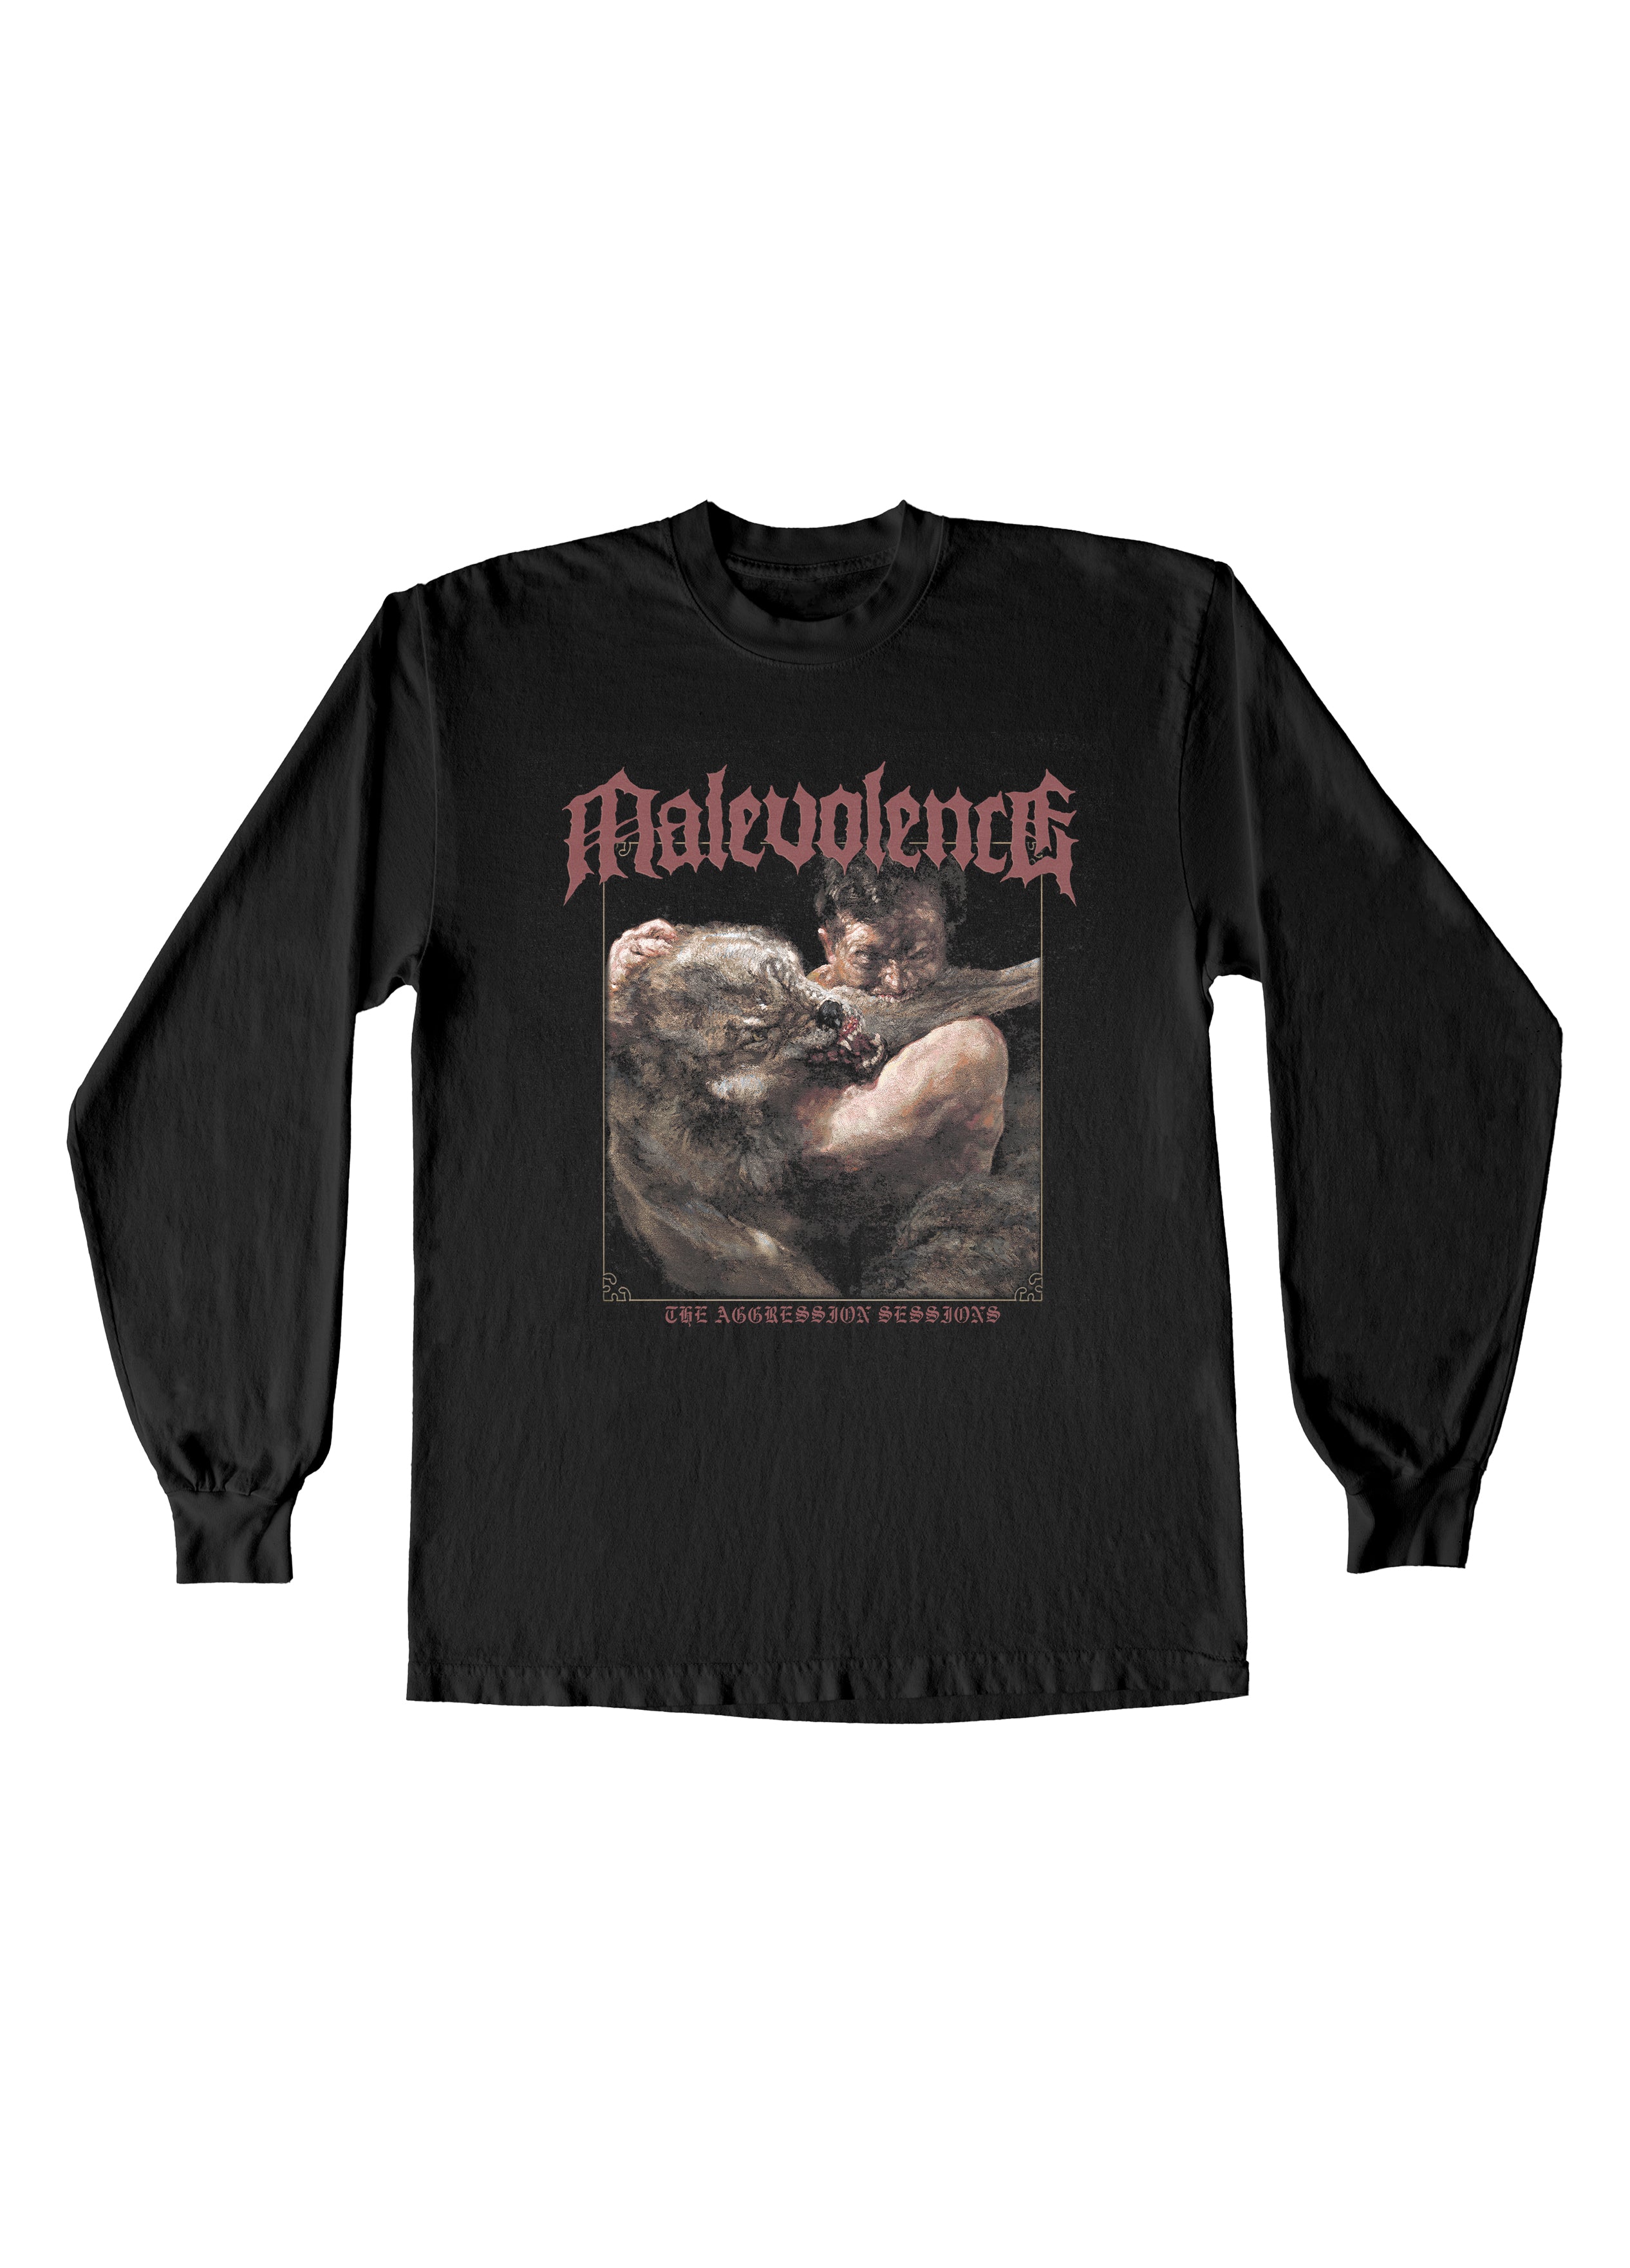 Malevolence - The Aggression Sessions Longsleeve